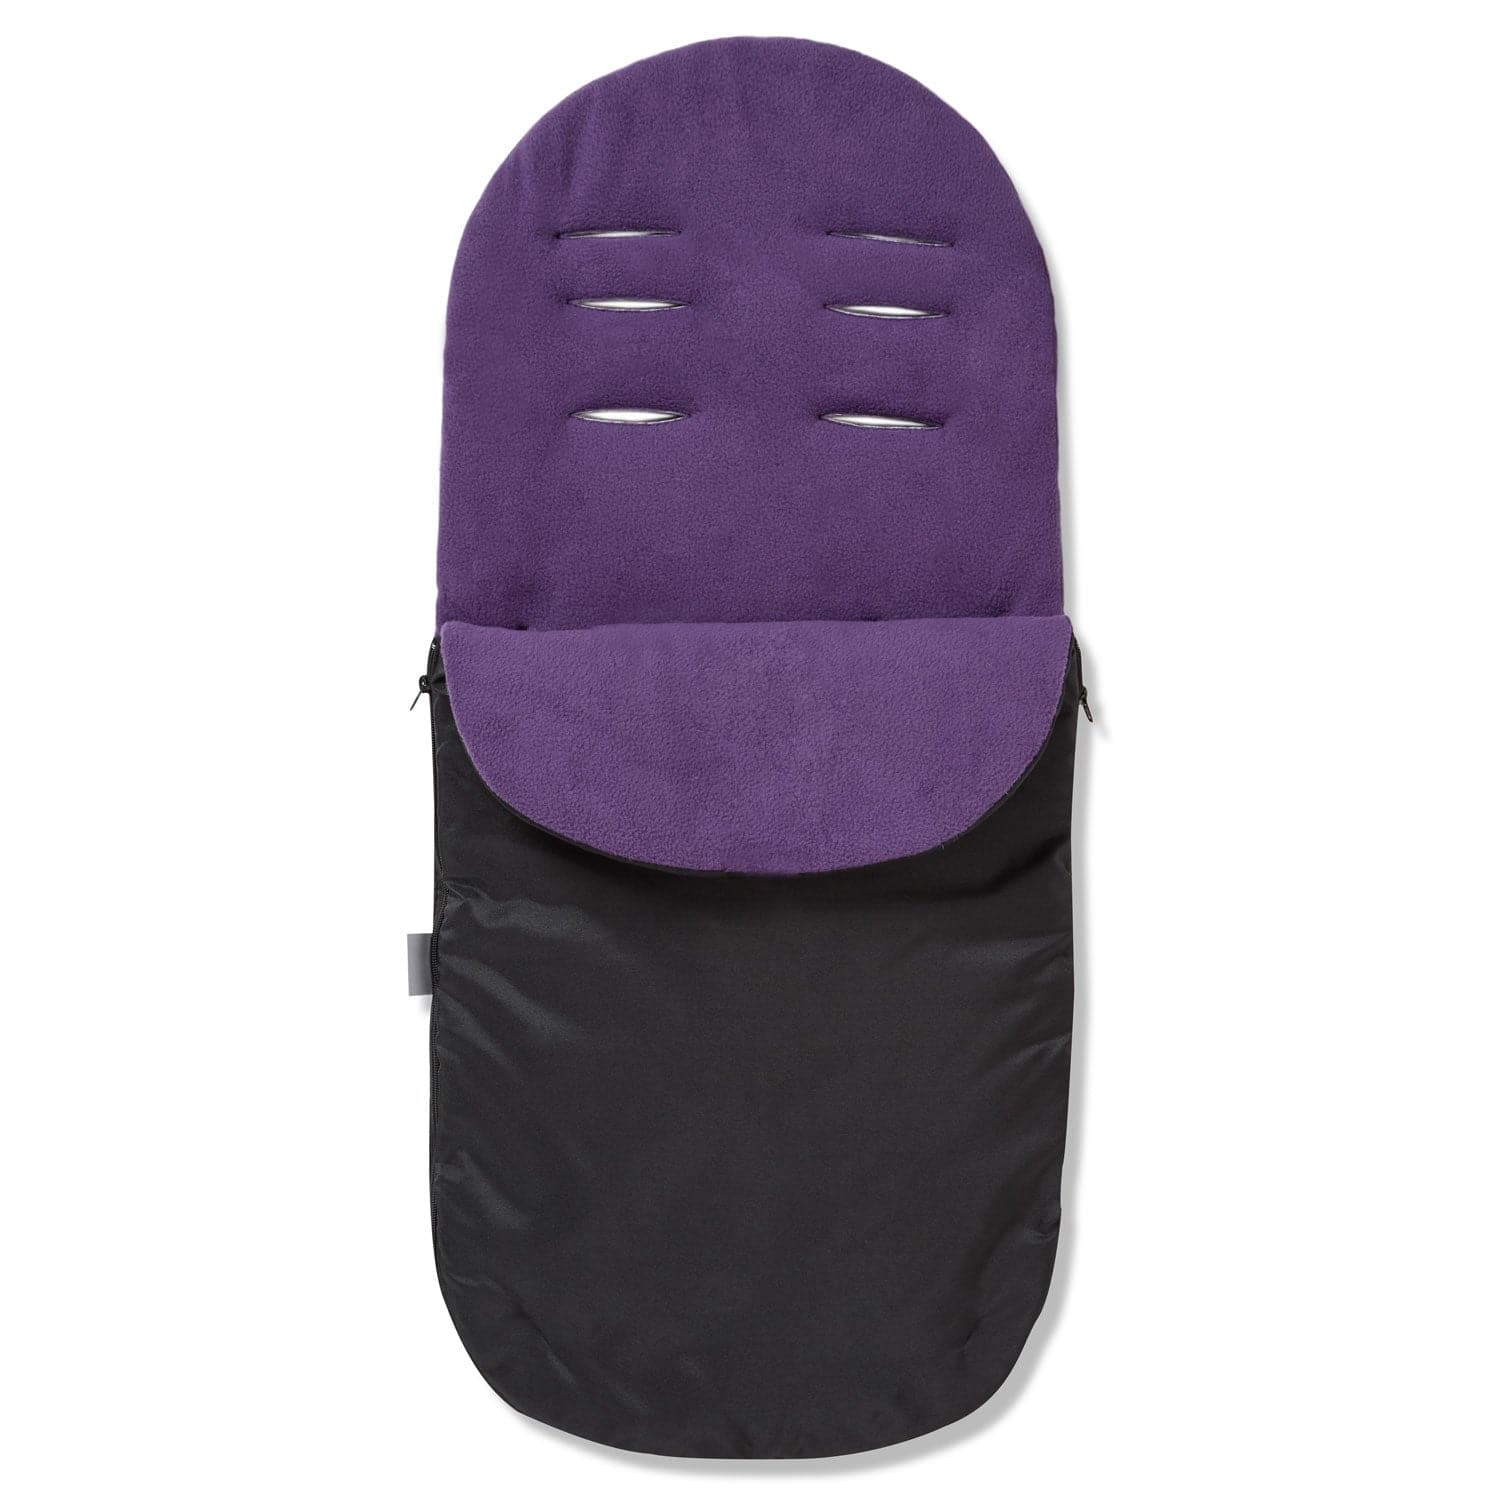 Footmuff / Cosy Toes Compatible with Teutonia - Purple / Fits All Models | For Your Little One